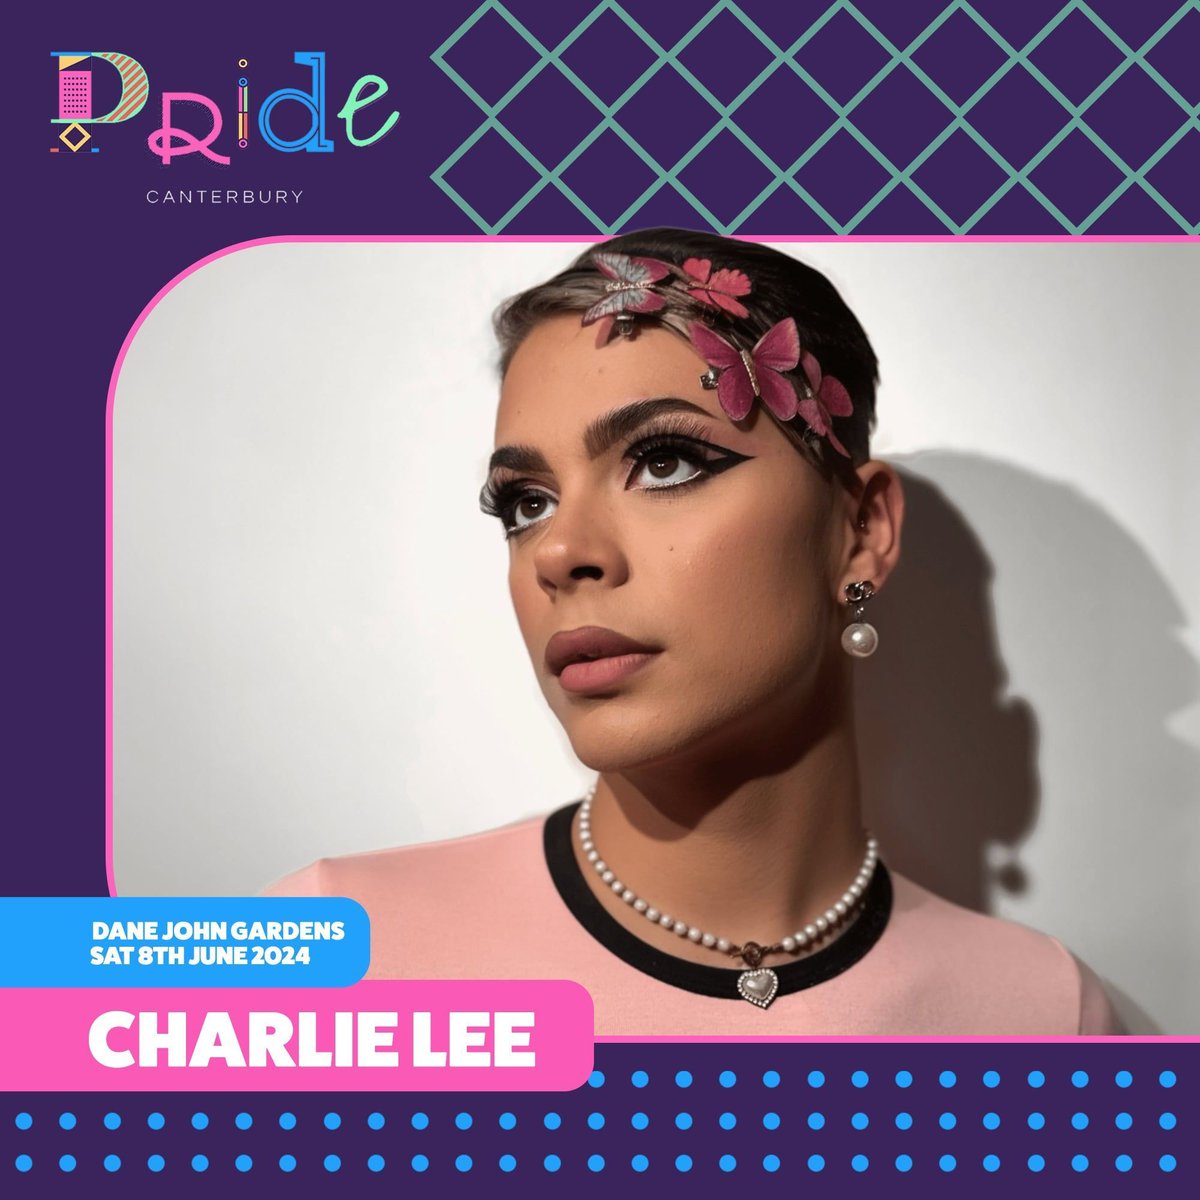 fresh off your feed and into the Dane John Gardens 👉 we're really looking forward to seeing TikTok + social superstar Charlie Lee party with us 🤩 @iam_charlie_lee